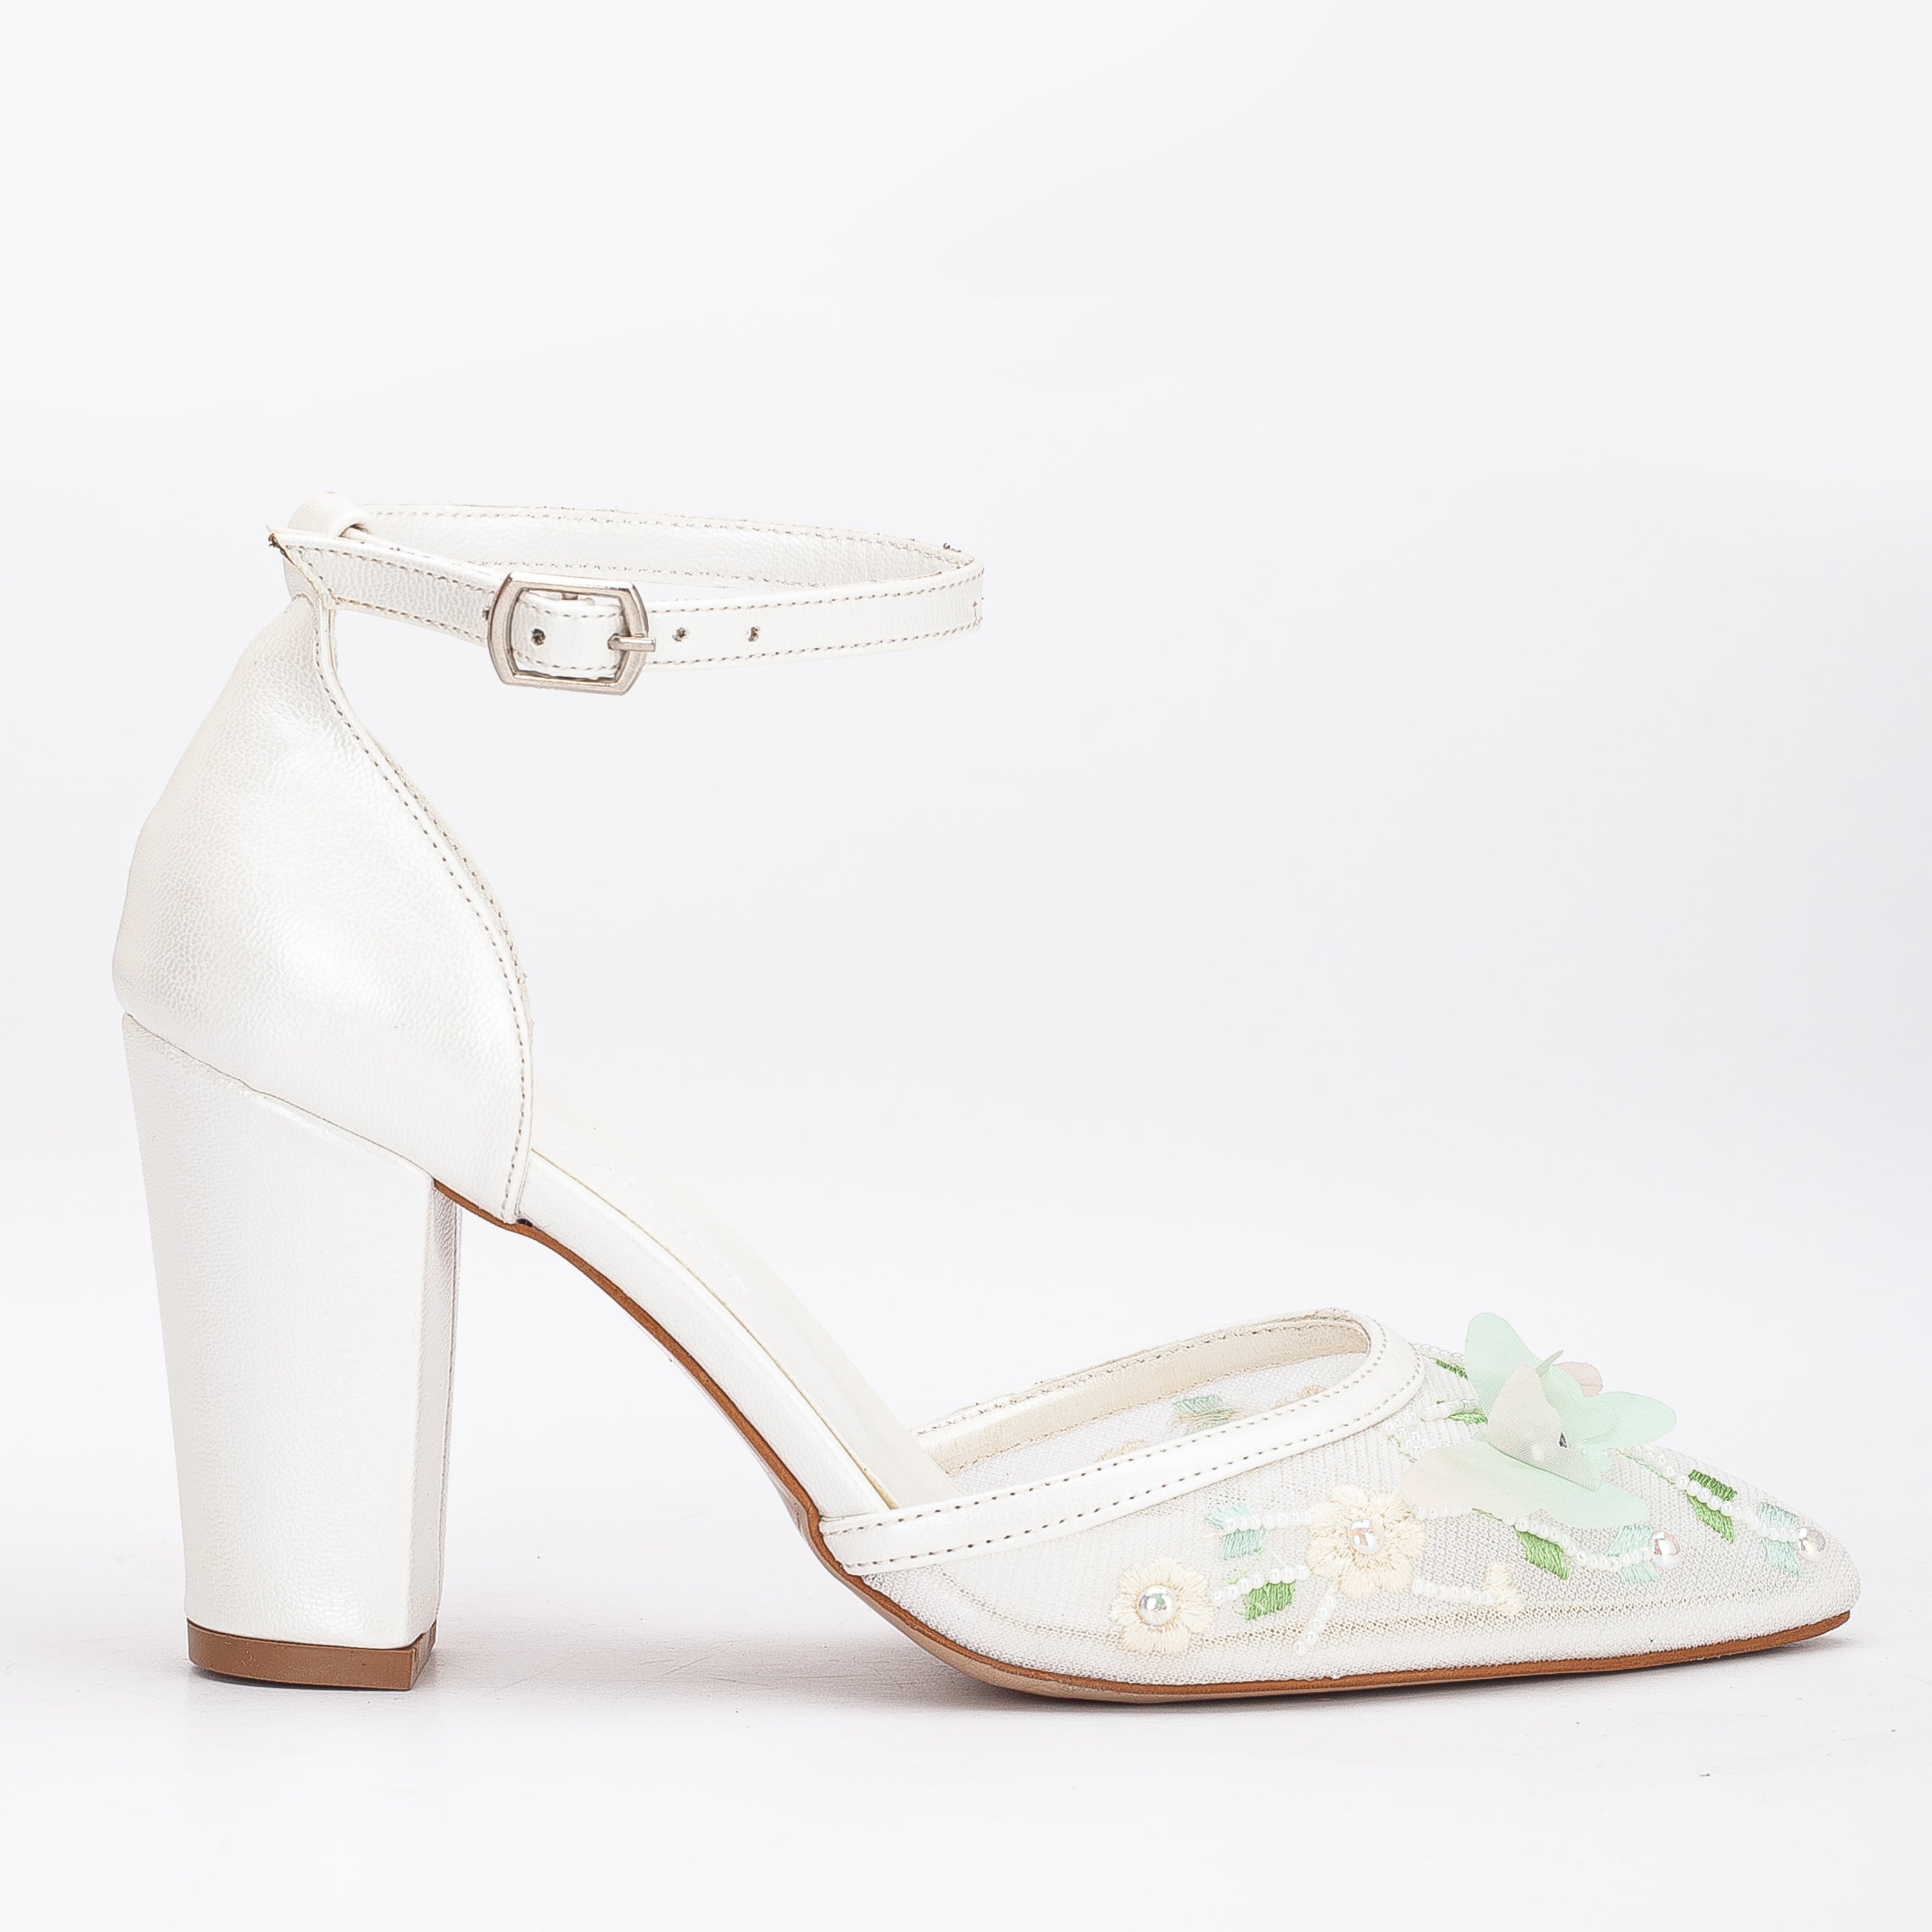 White lace embroidered heels, Embroidered white lace heels, White lace wedding heels with embroidery, Lace bridal heels with embroidery, White lace embroidered pumps, Embroidered lace bridal shoes, White lace heels with floral embroidery, Embroidered lace wedding shoes, White lace heels with intricate embroidery, Lace bridal heels with delicate embroidery.